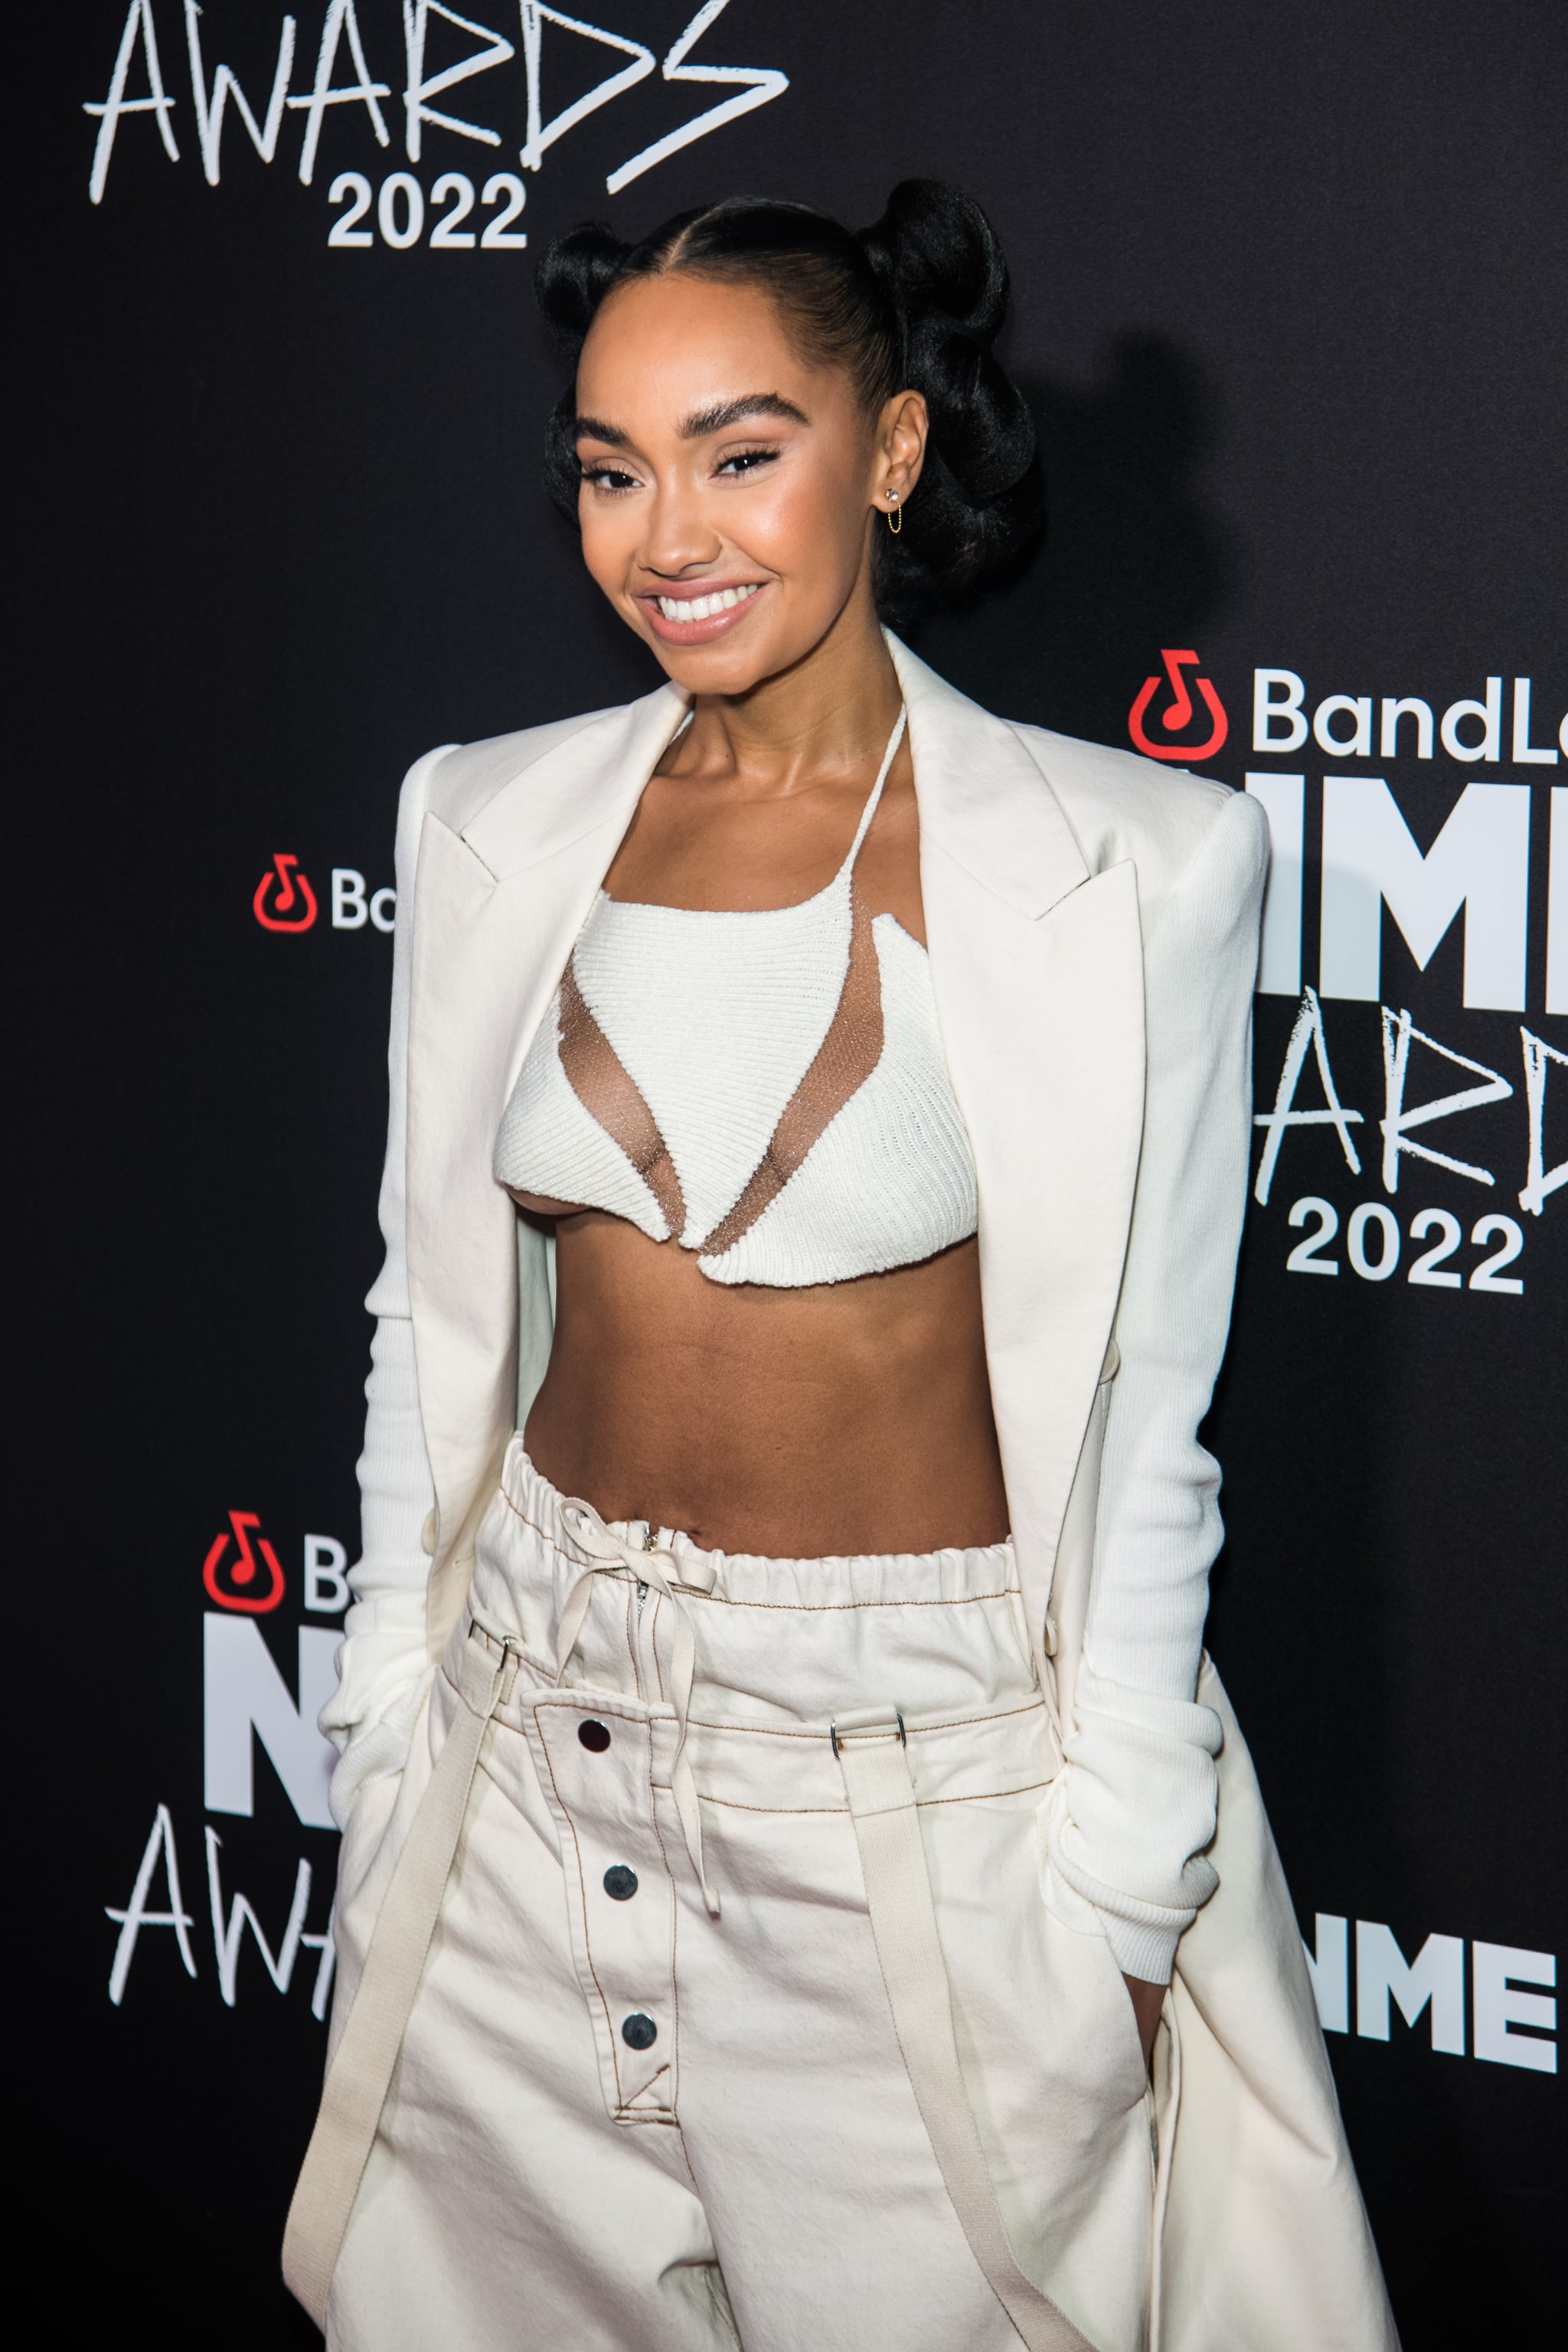 LONDON, ENGLAND - MARCH 02:  Leigh-Anne Pinnock attends the BandLab NME Awards 2022 at O2 Academy Brixton on March 2, 2022 in London, England.  (Photo by Joseph Okpako/WireImage)